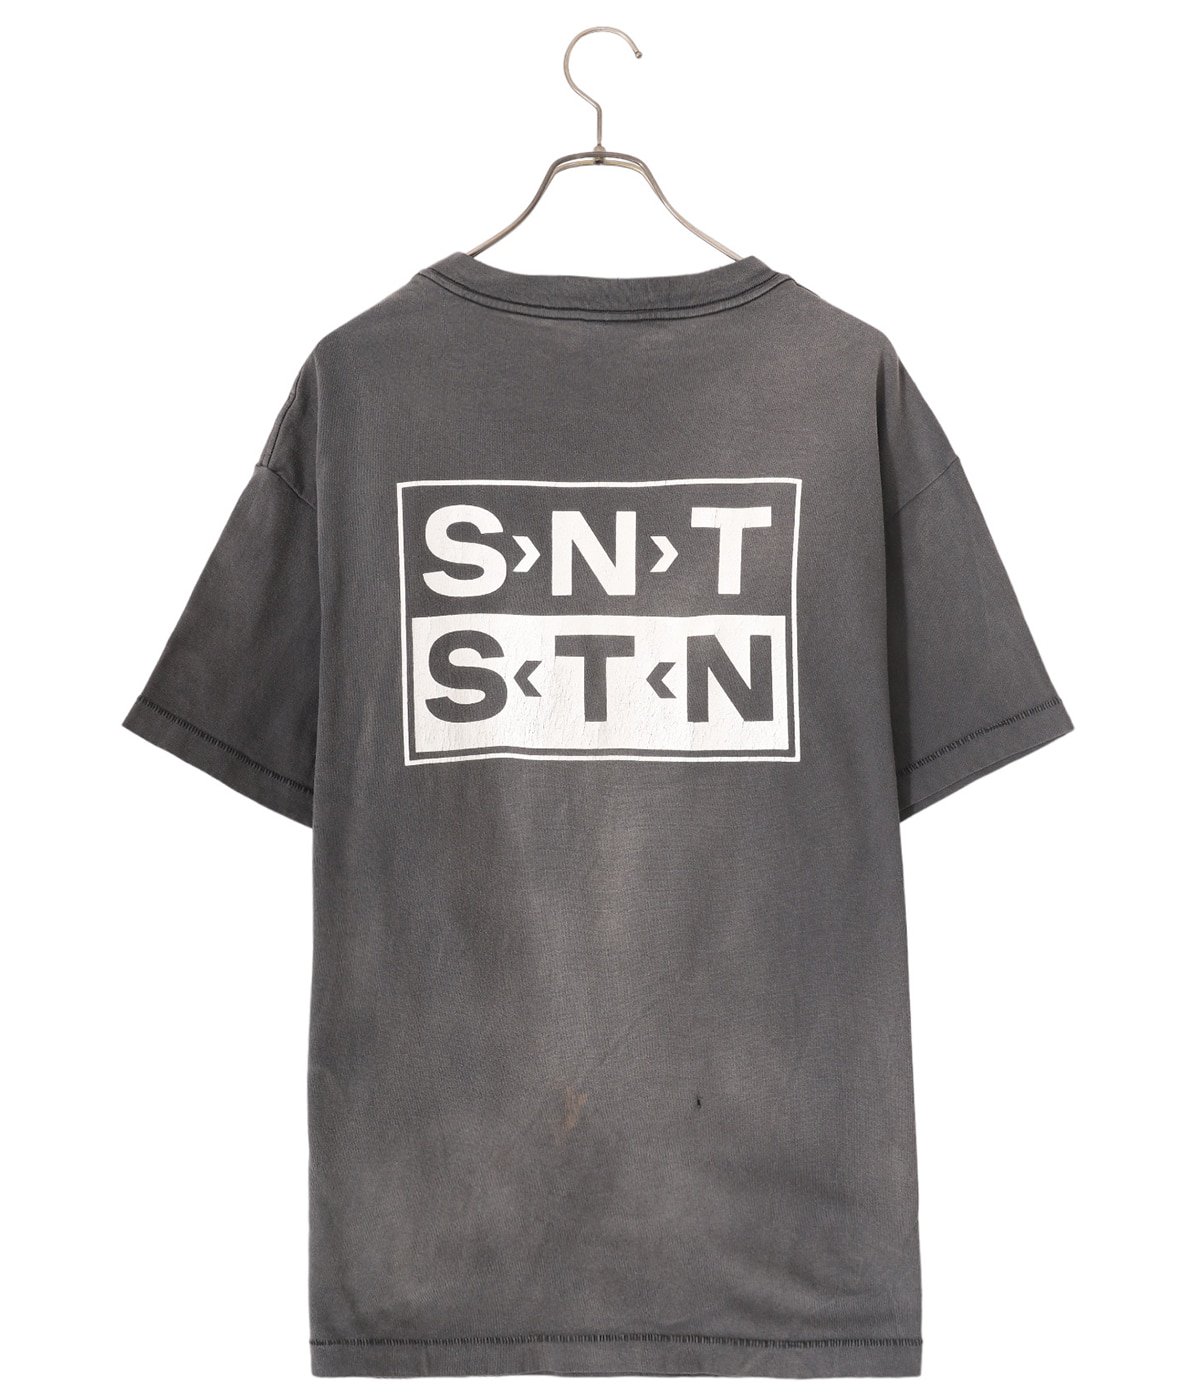 SS TEE/S>N>T | SAINT Mxxxxxx(セント マイケル) / トップス